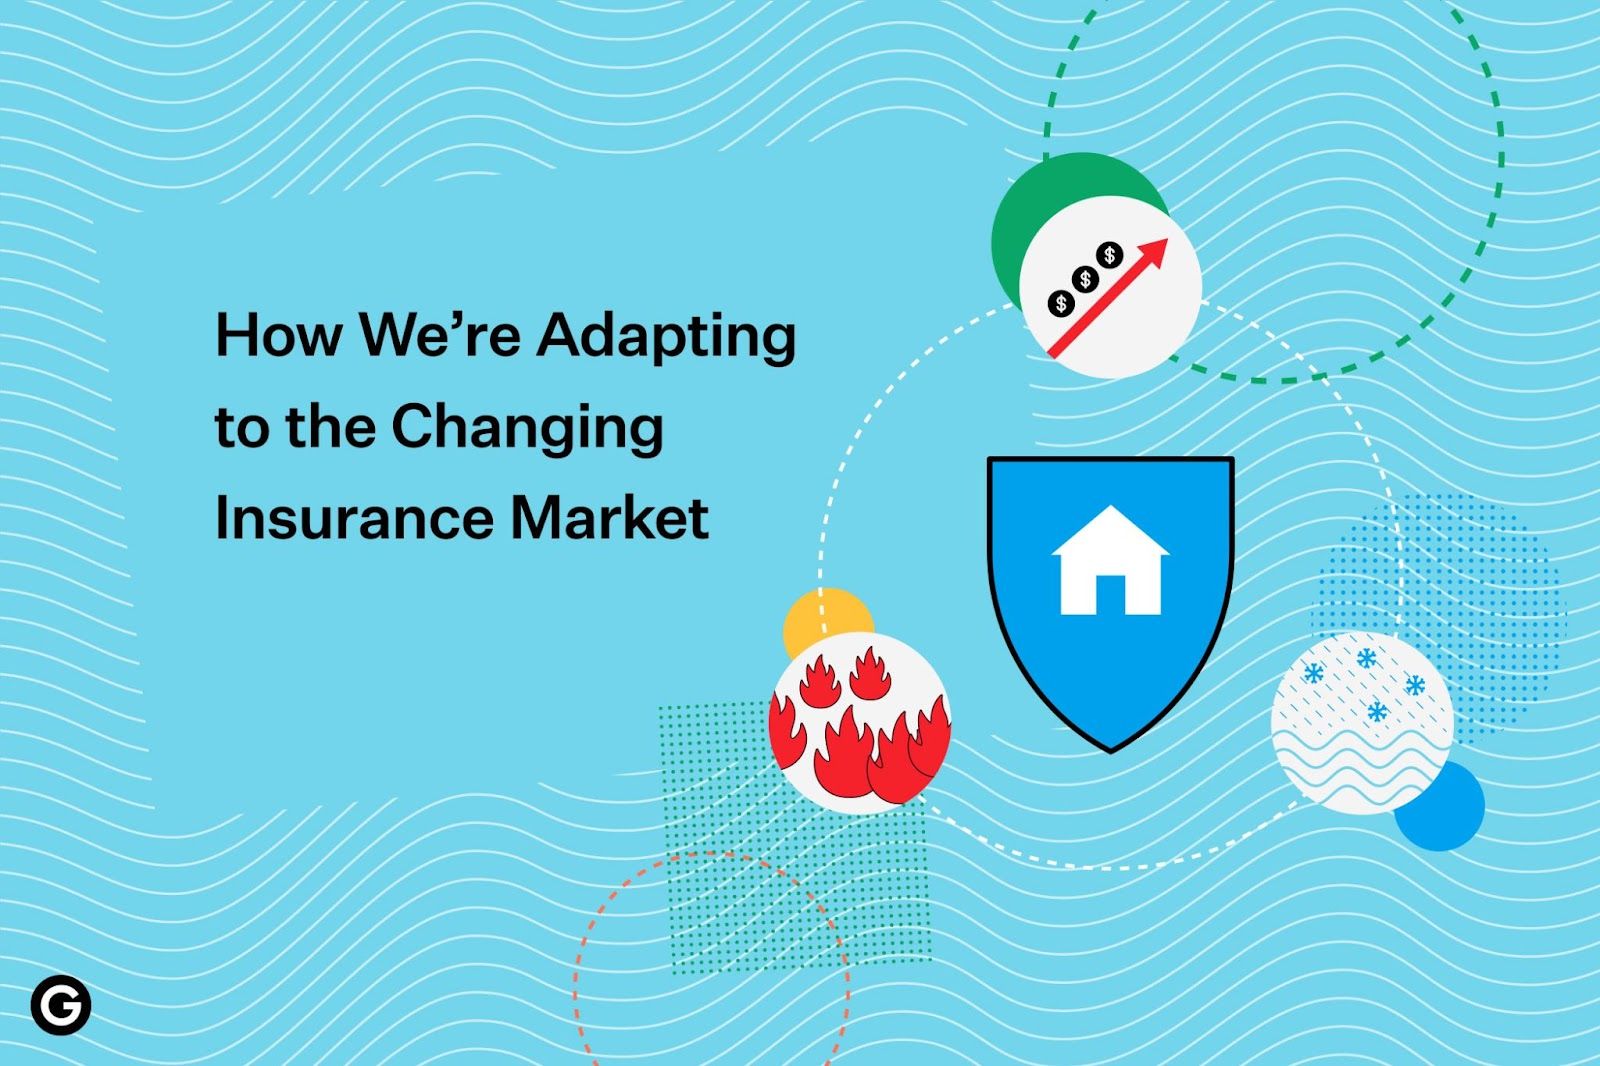 How We're Adapting to the Changing Insurance Market